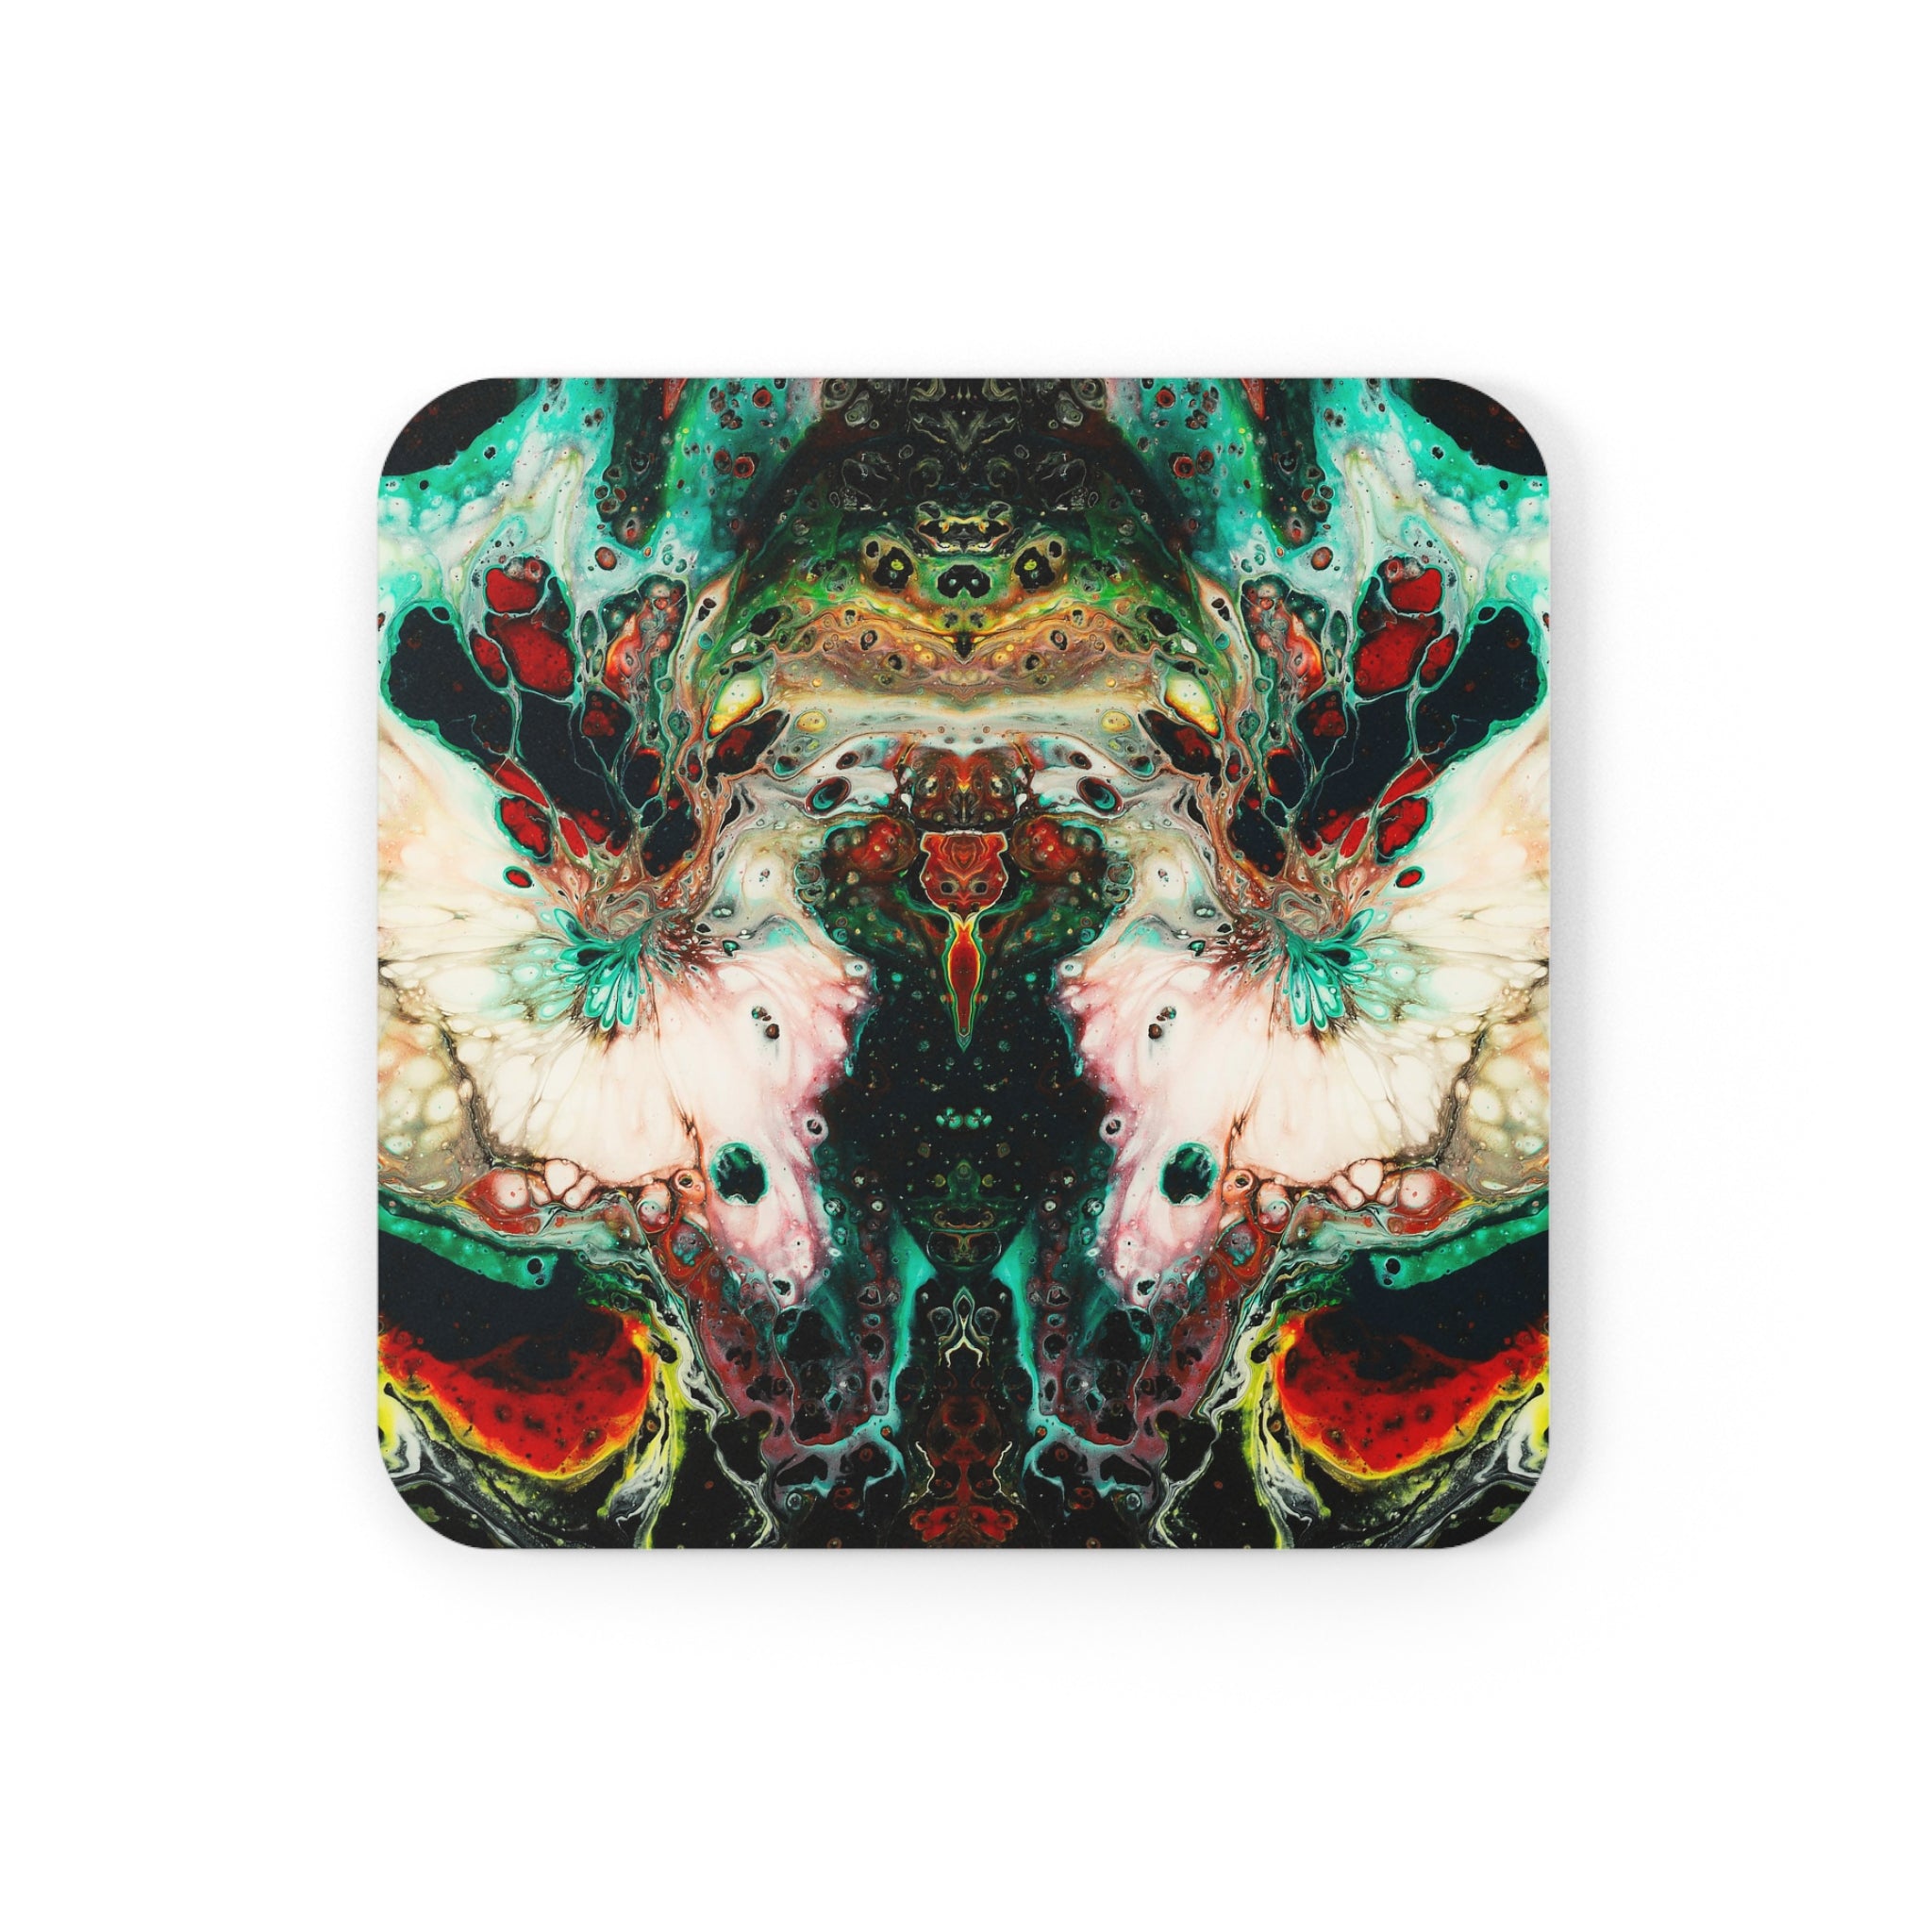 Cameron Creations - Flowers Of The Galaxy - Stylish Coffee Coaster - Square Front